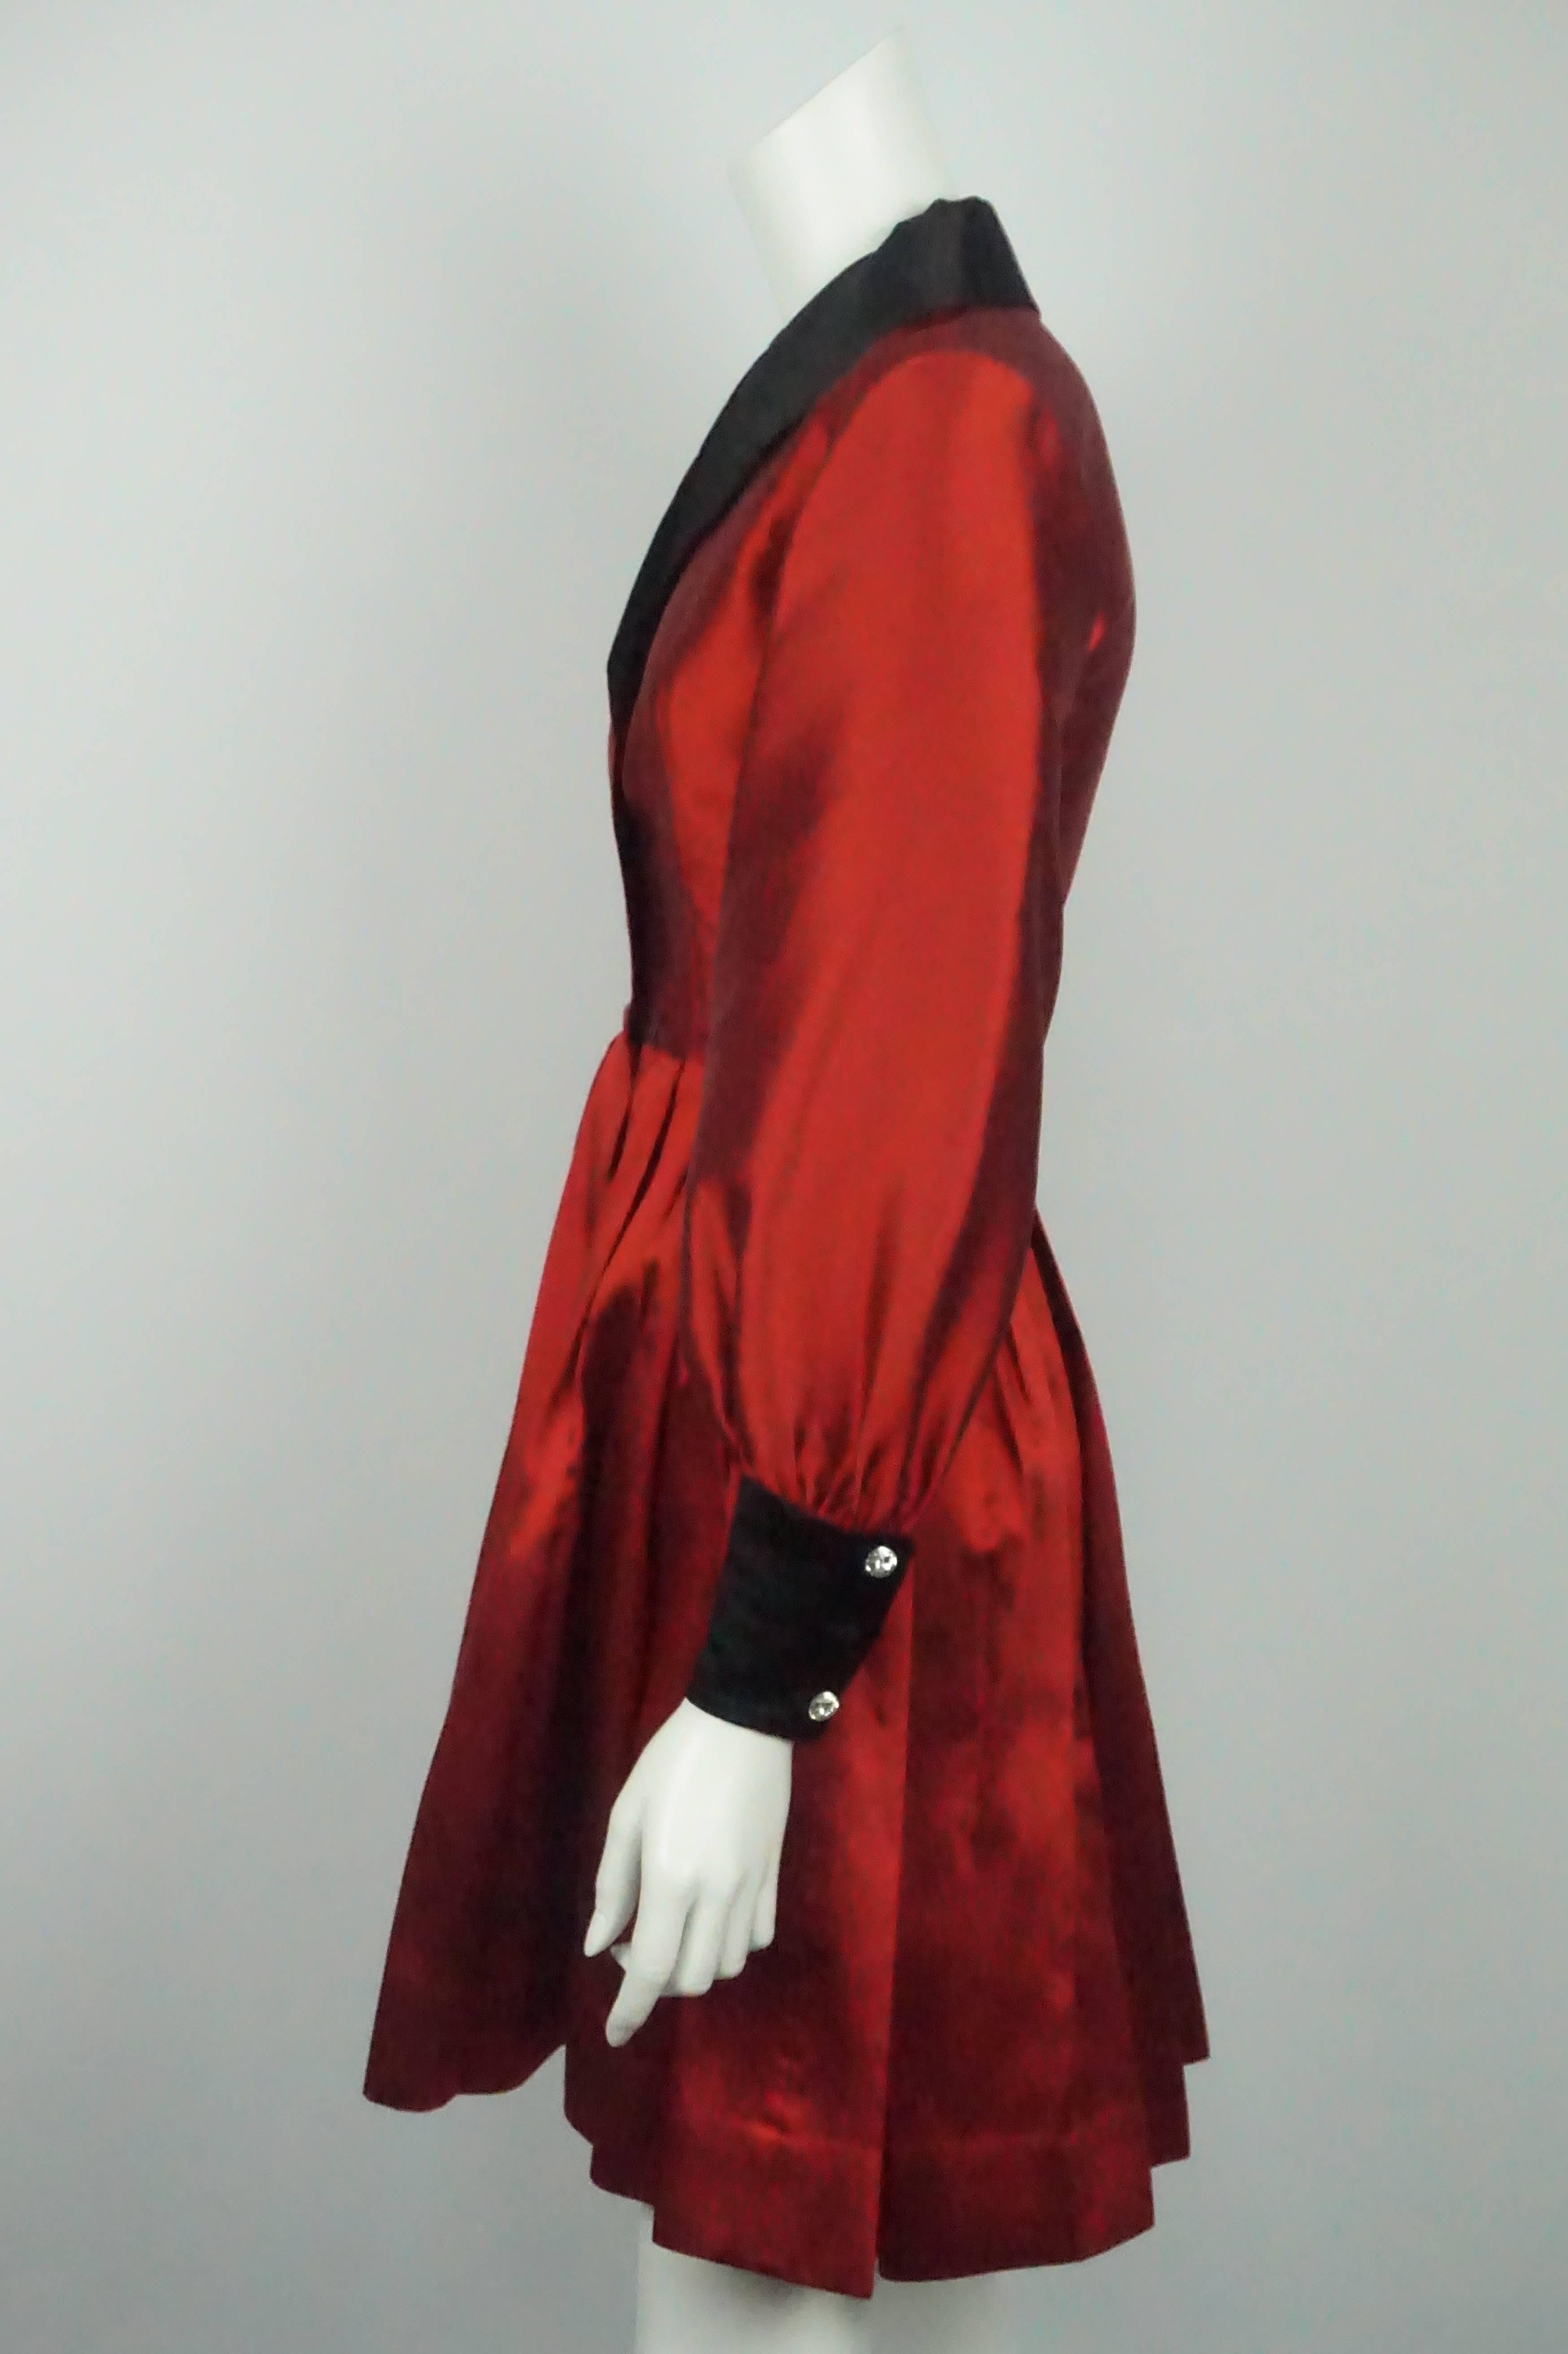 James Purcell Red and Black Silk L/S Gem Button Dress - 4  This silk dress is in excellent condition. The dress has a single gem button in the middle of the top. There are also two hook and eye for the closure in the front at the waist. The skirt is